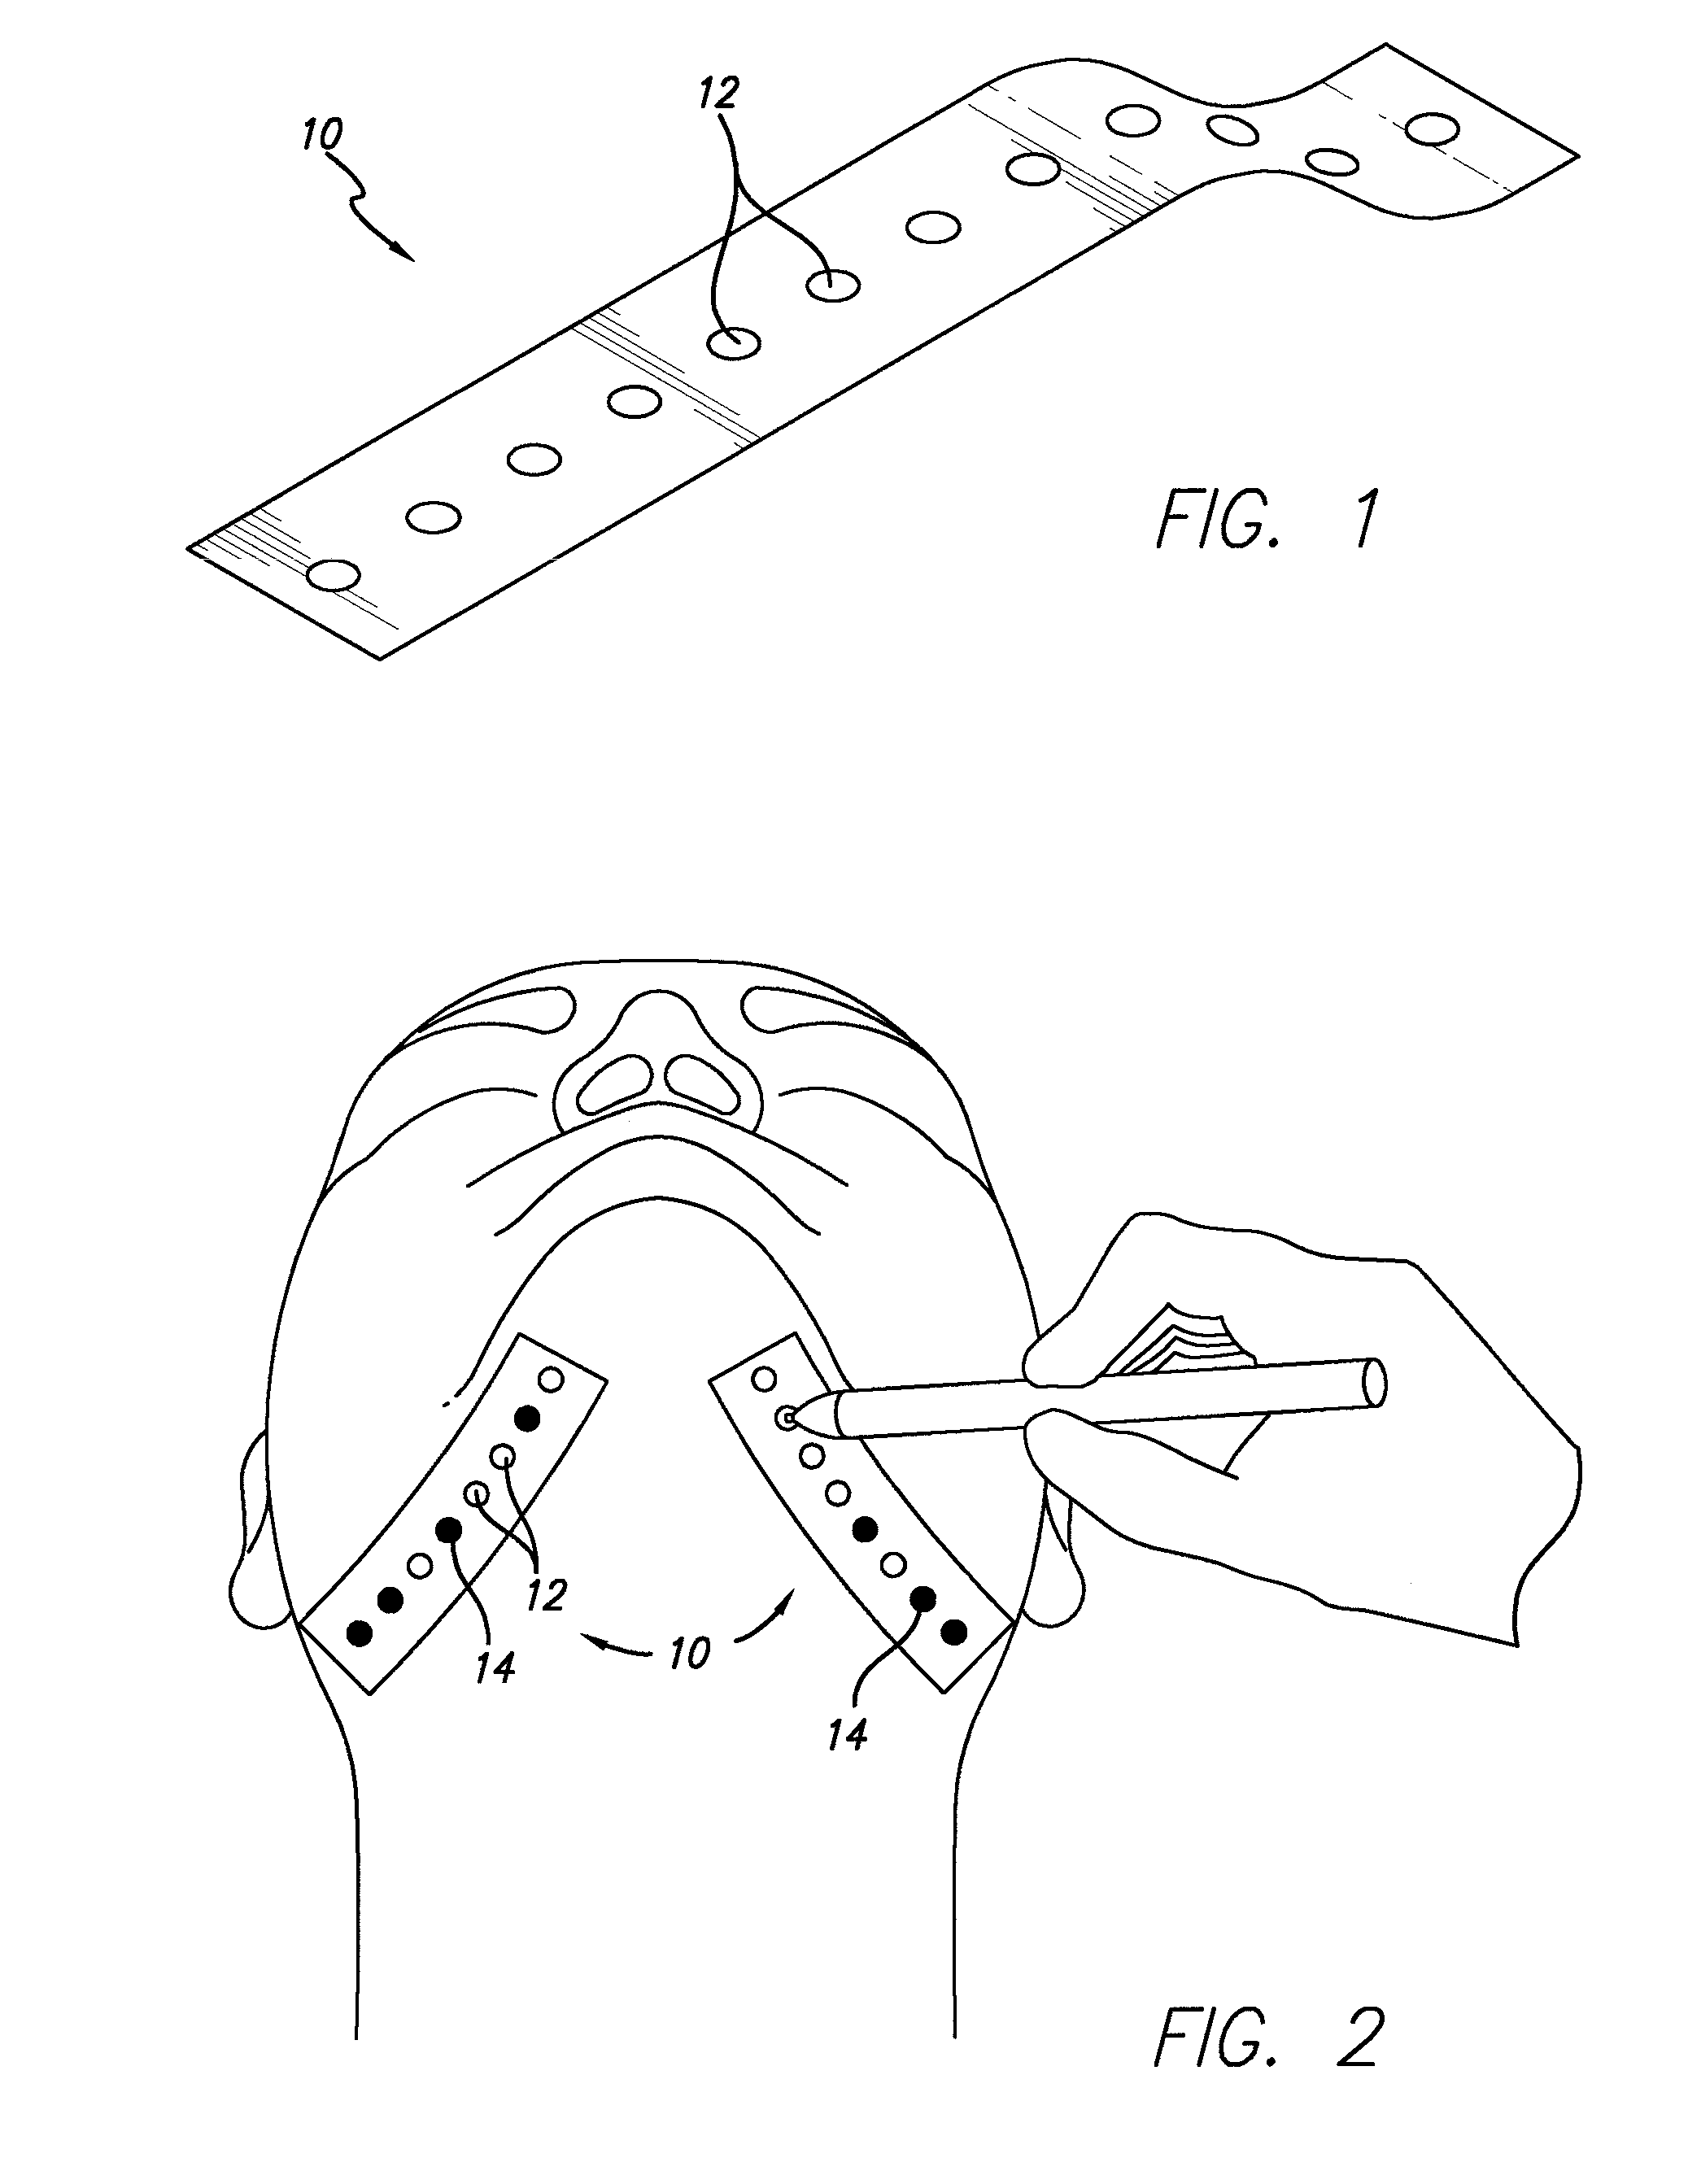 Suture and method for using same